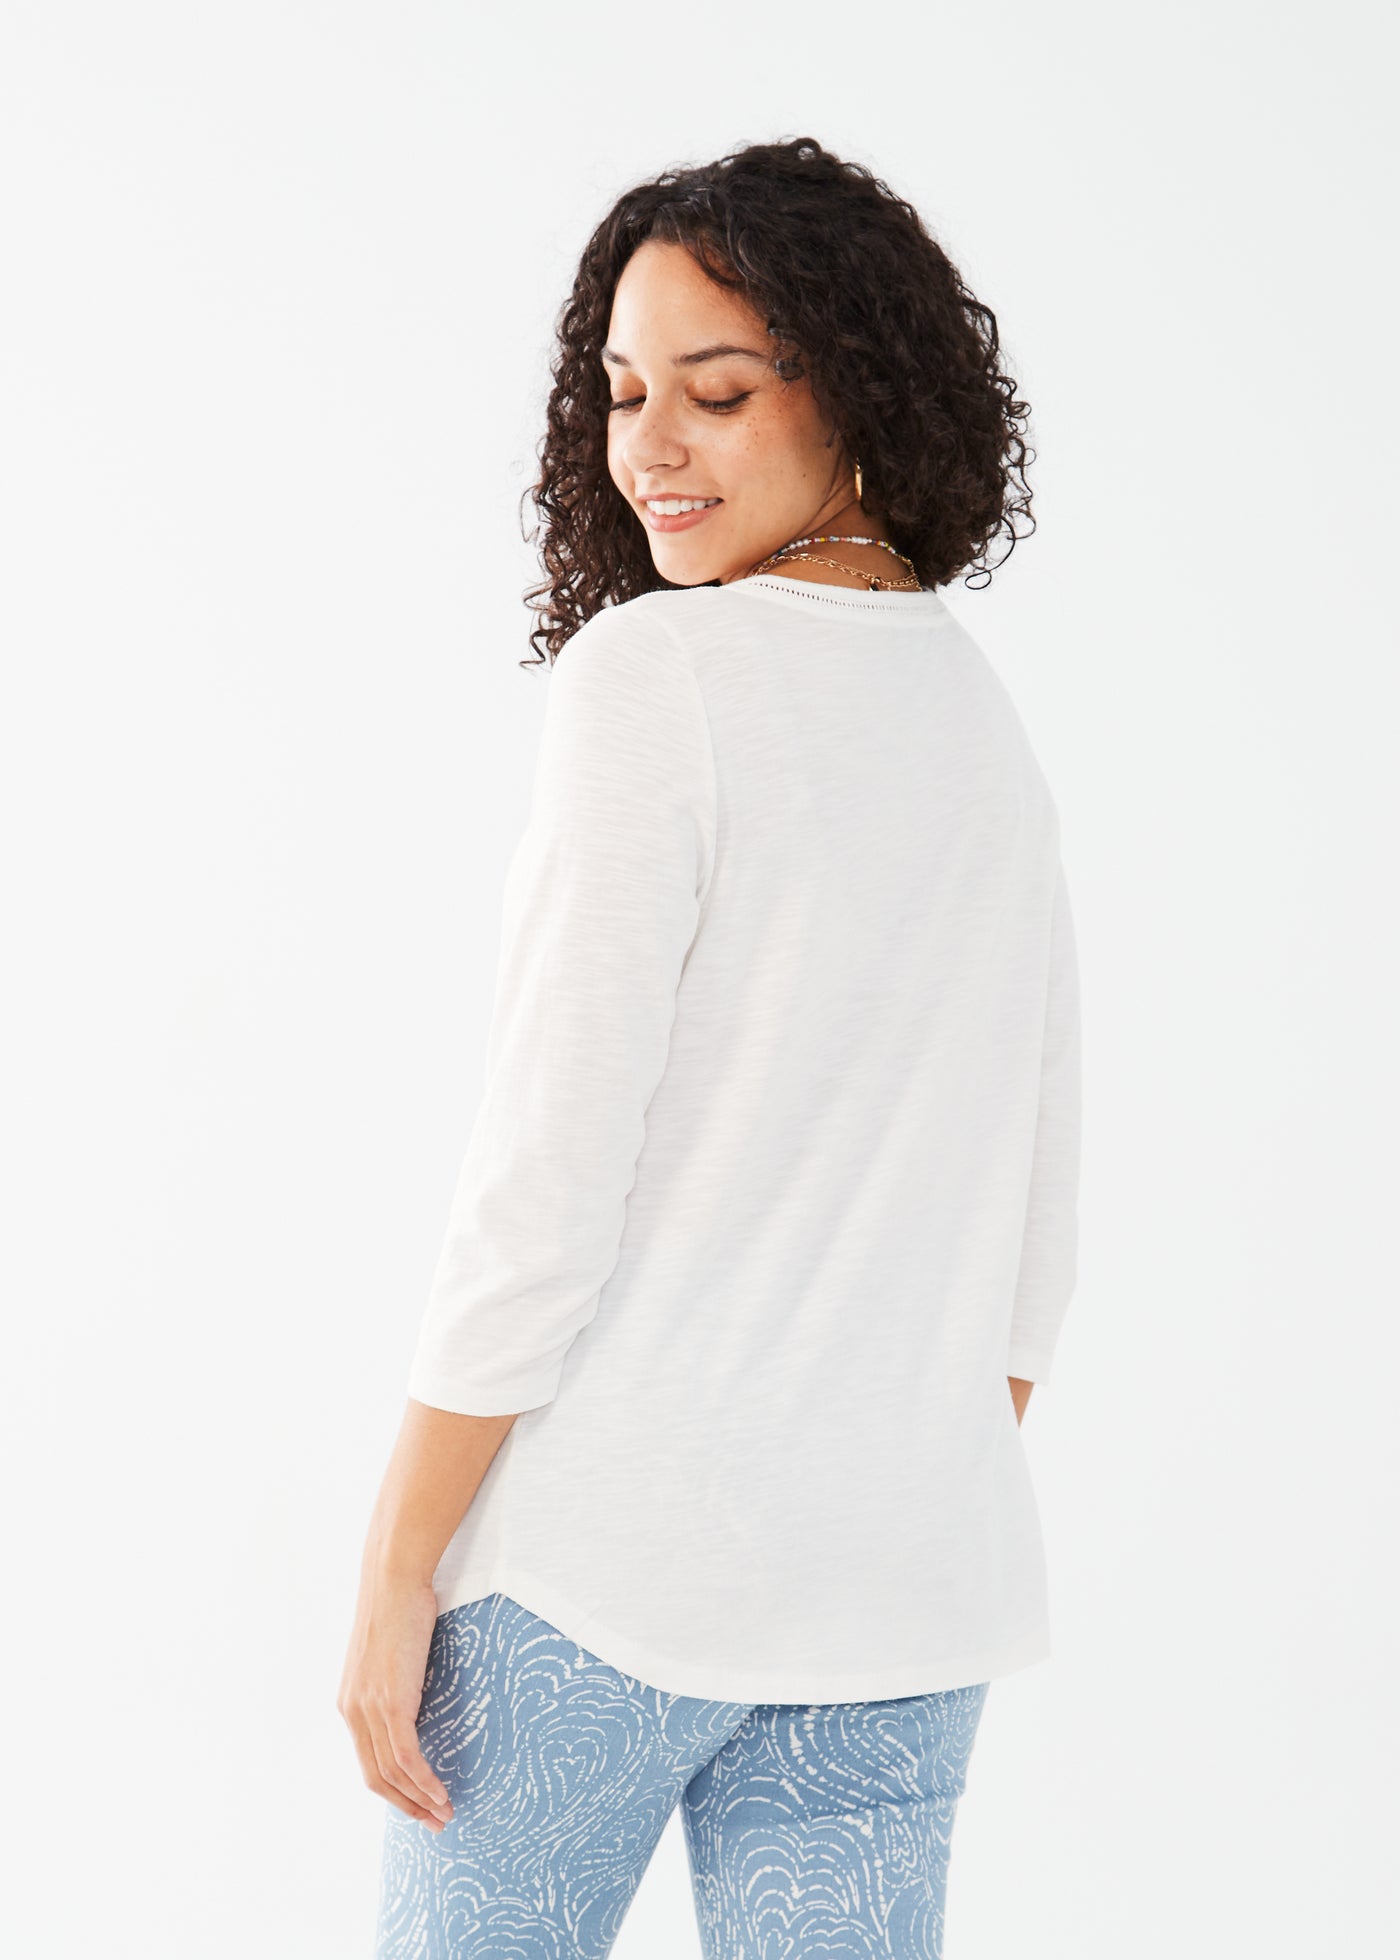 French Dressing Jeans 3/4 Sleeve Split Neck Top 